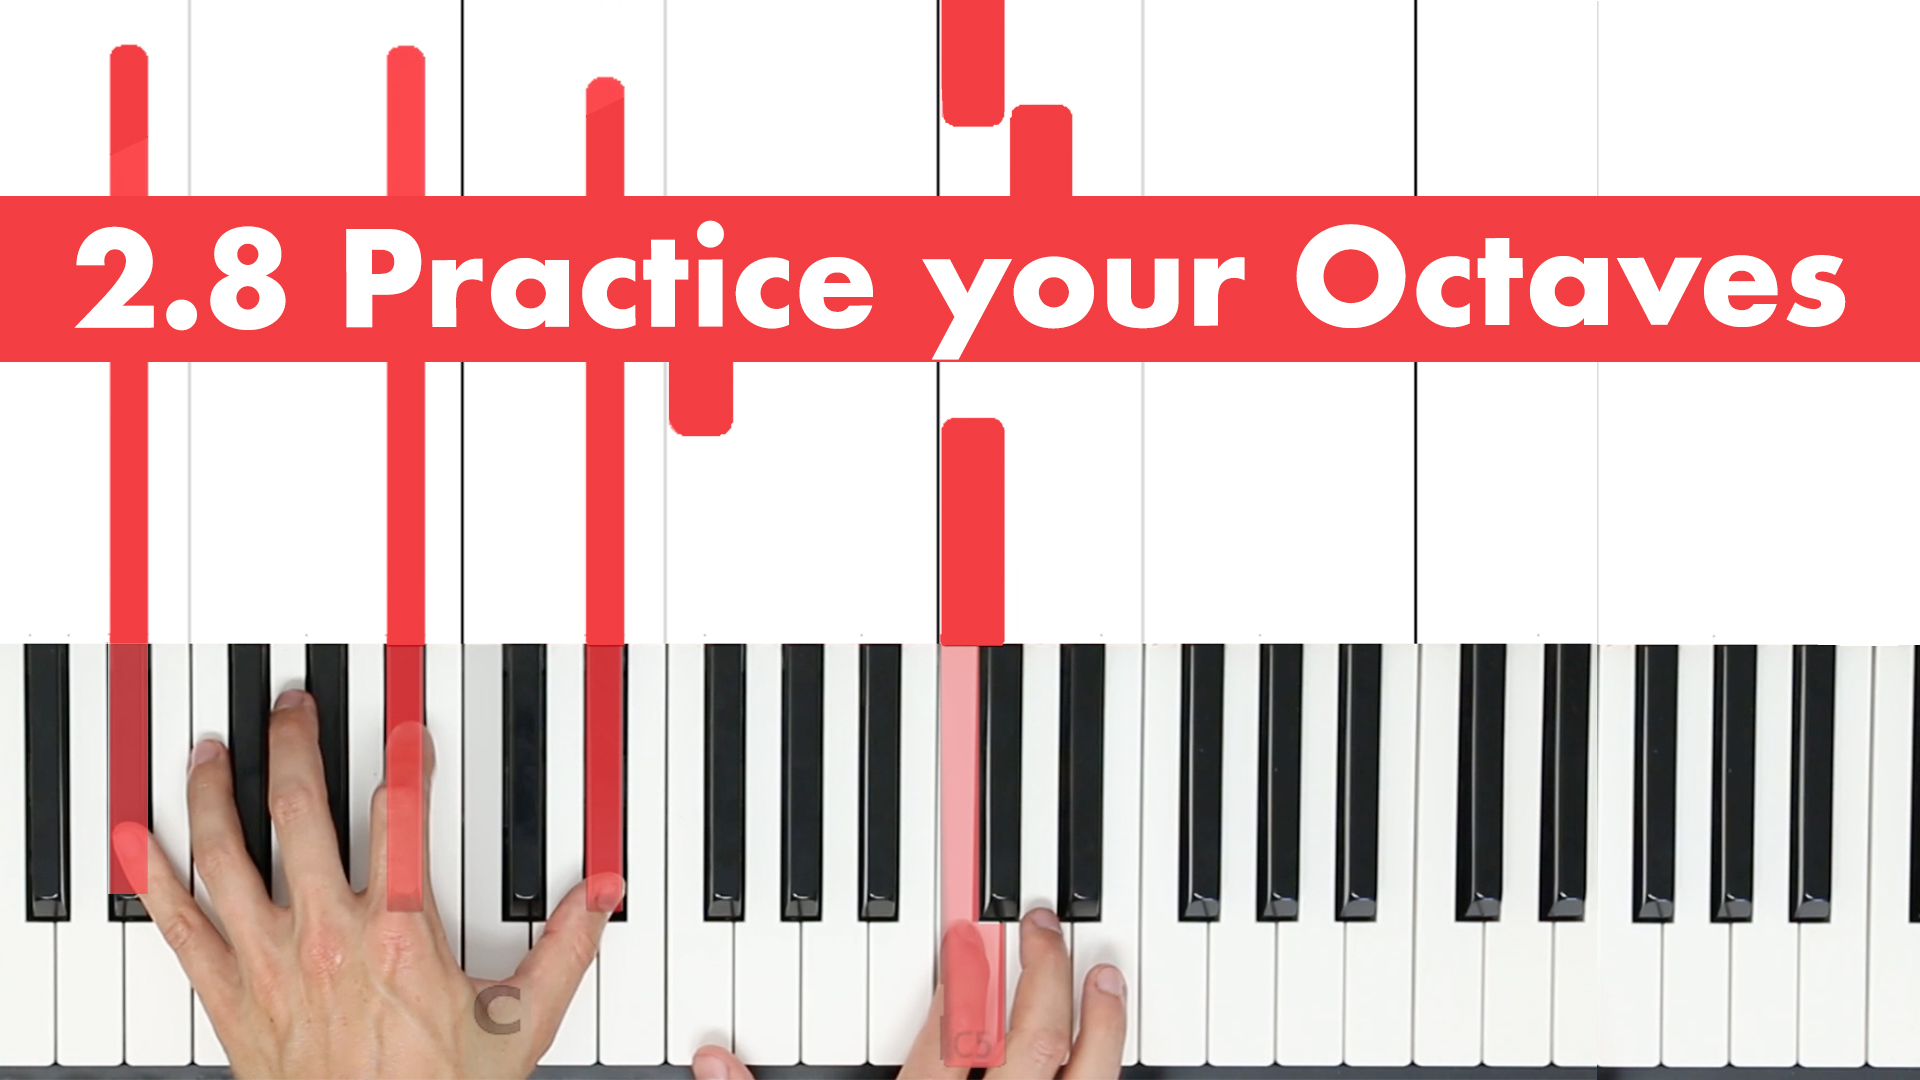 2.8 Practice your Octaves